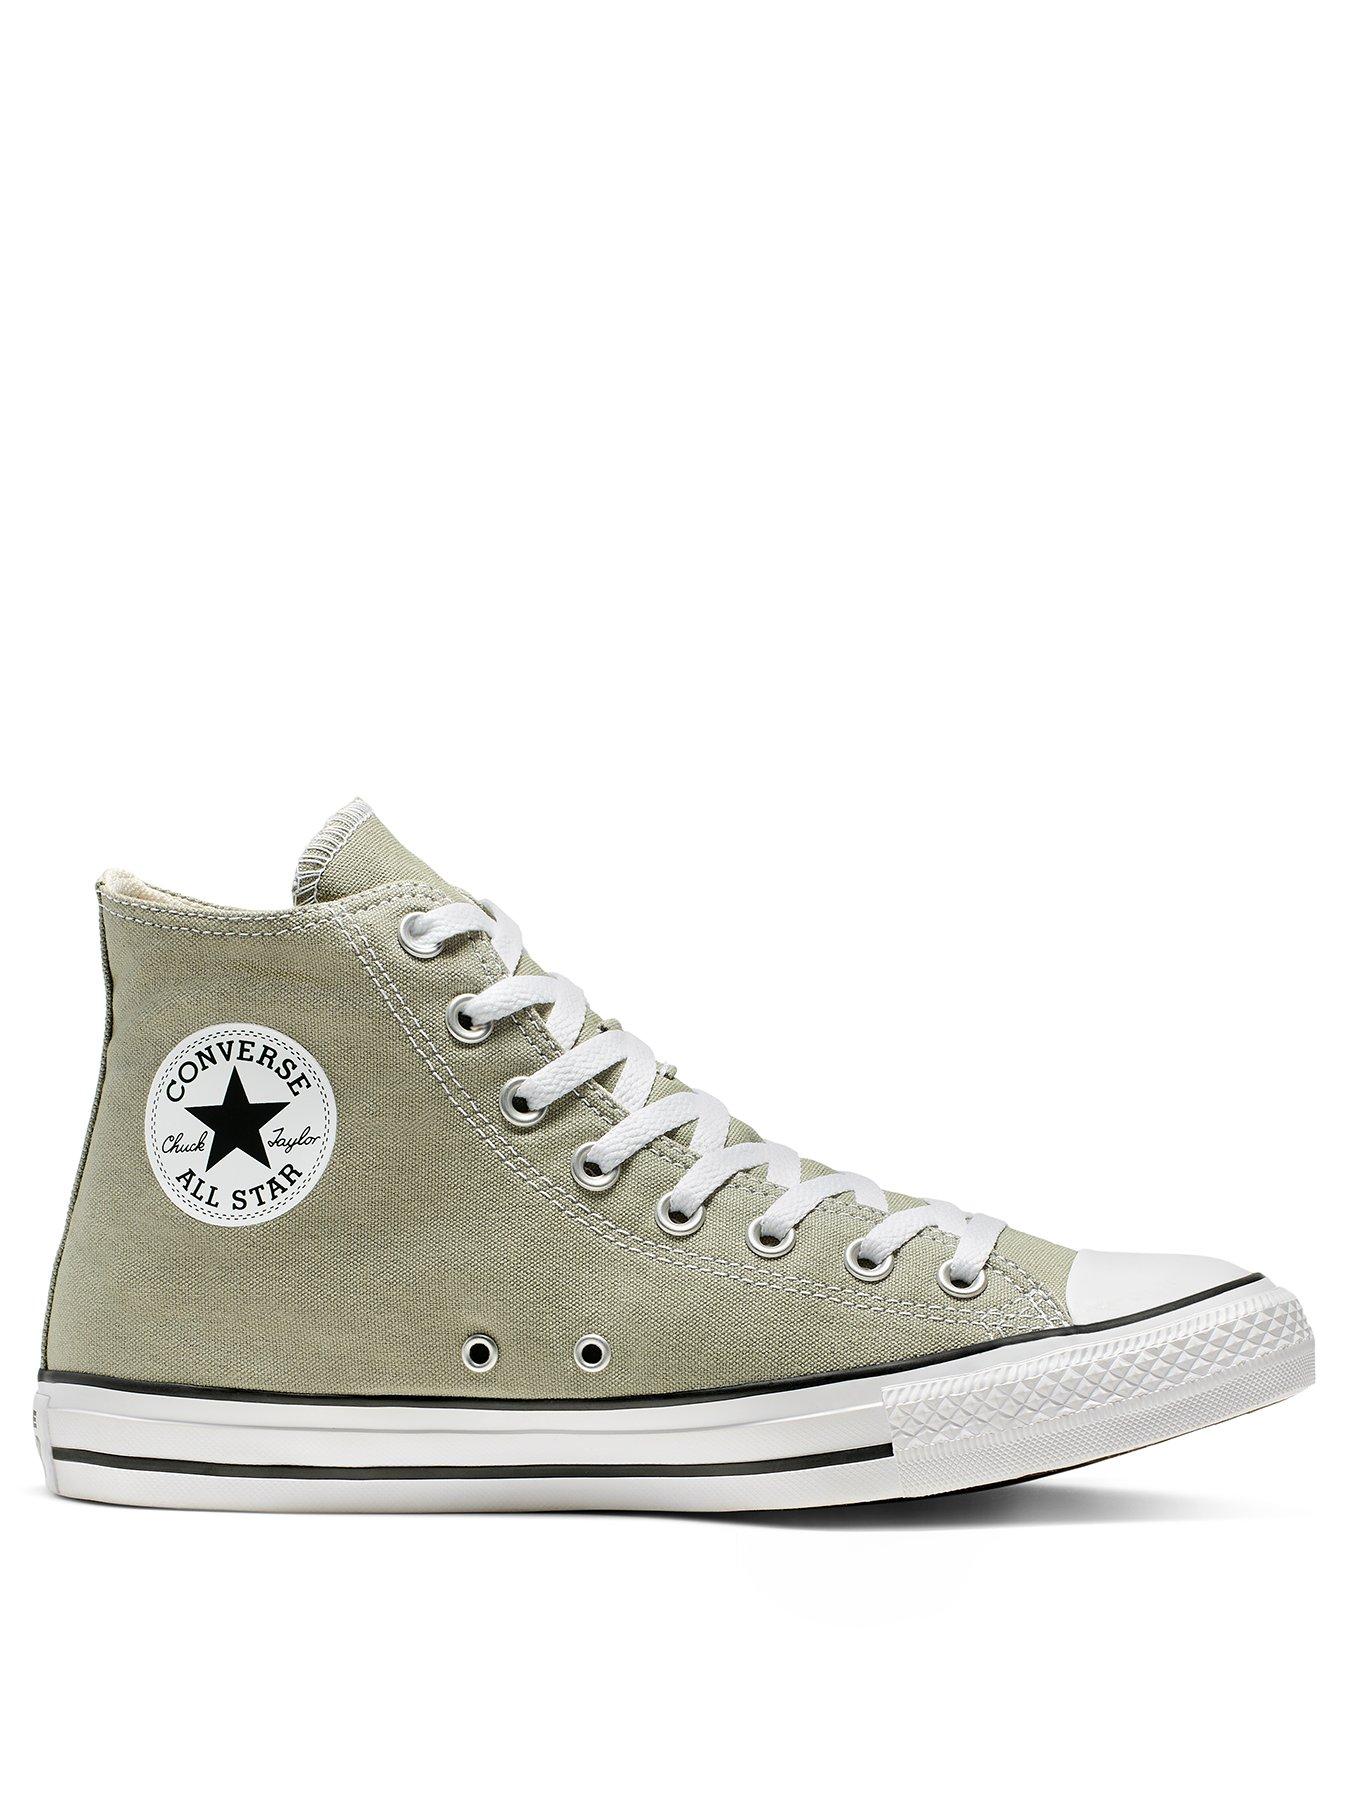 stores that sell converse for cheap